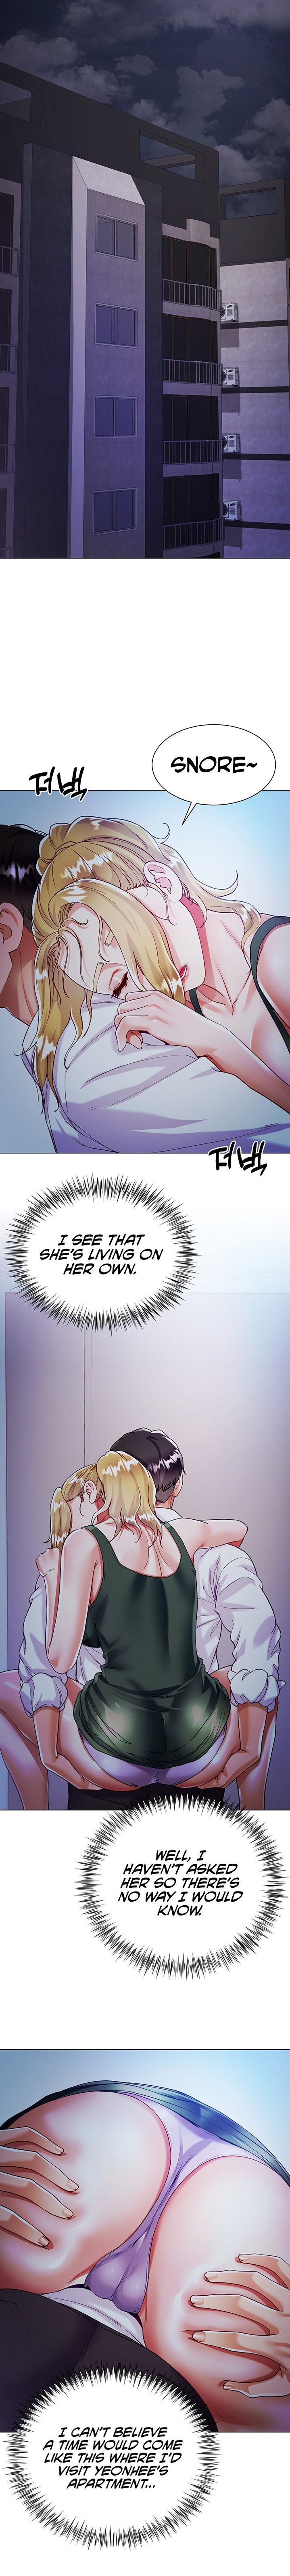 My Sister-in-law’s Skirt - Chapter 18 Page 16